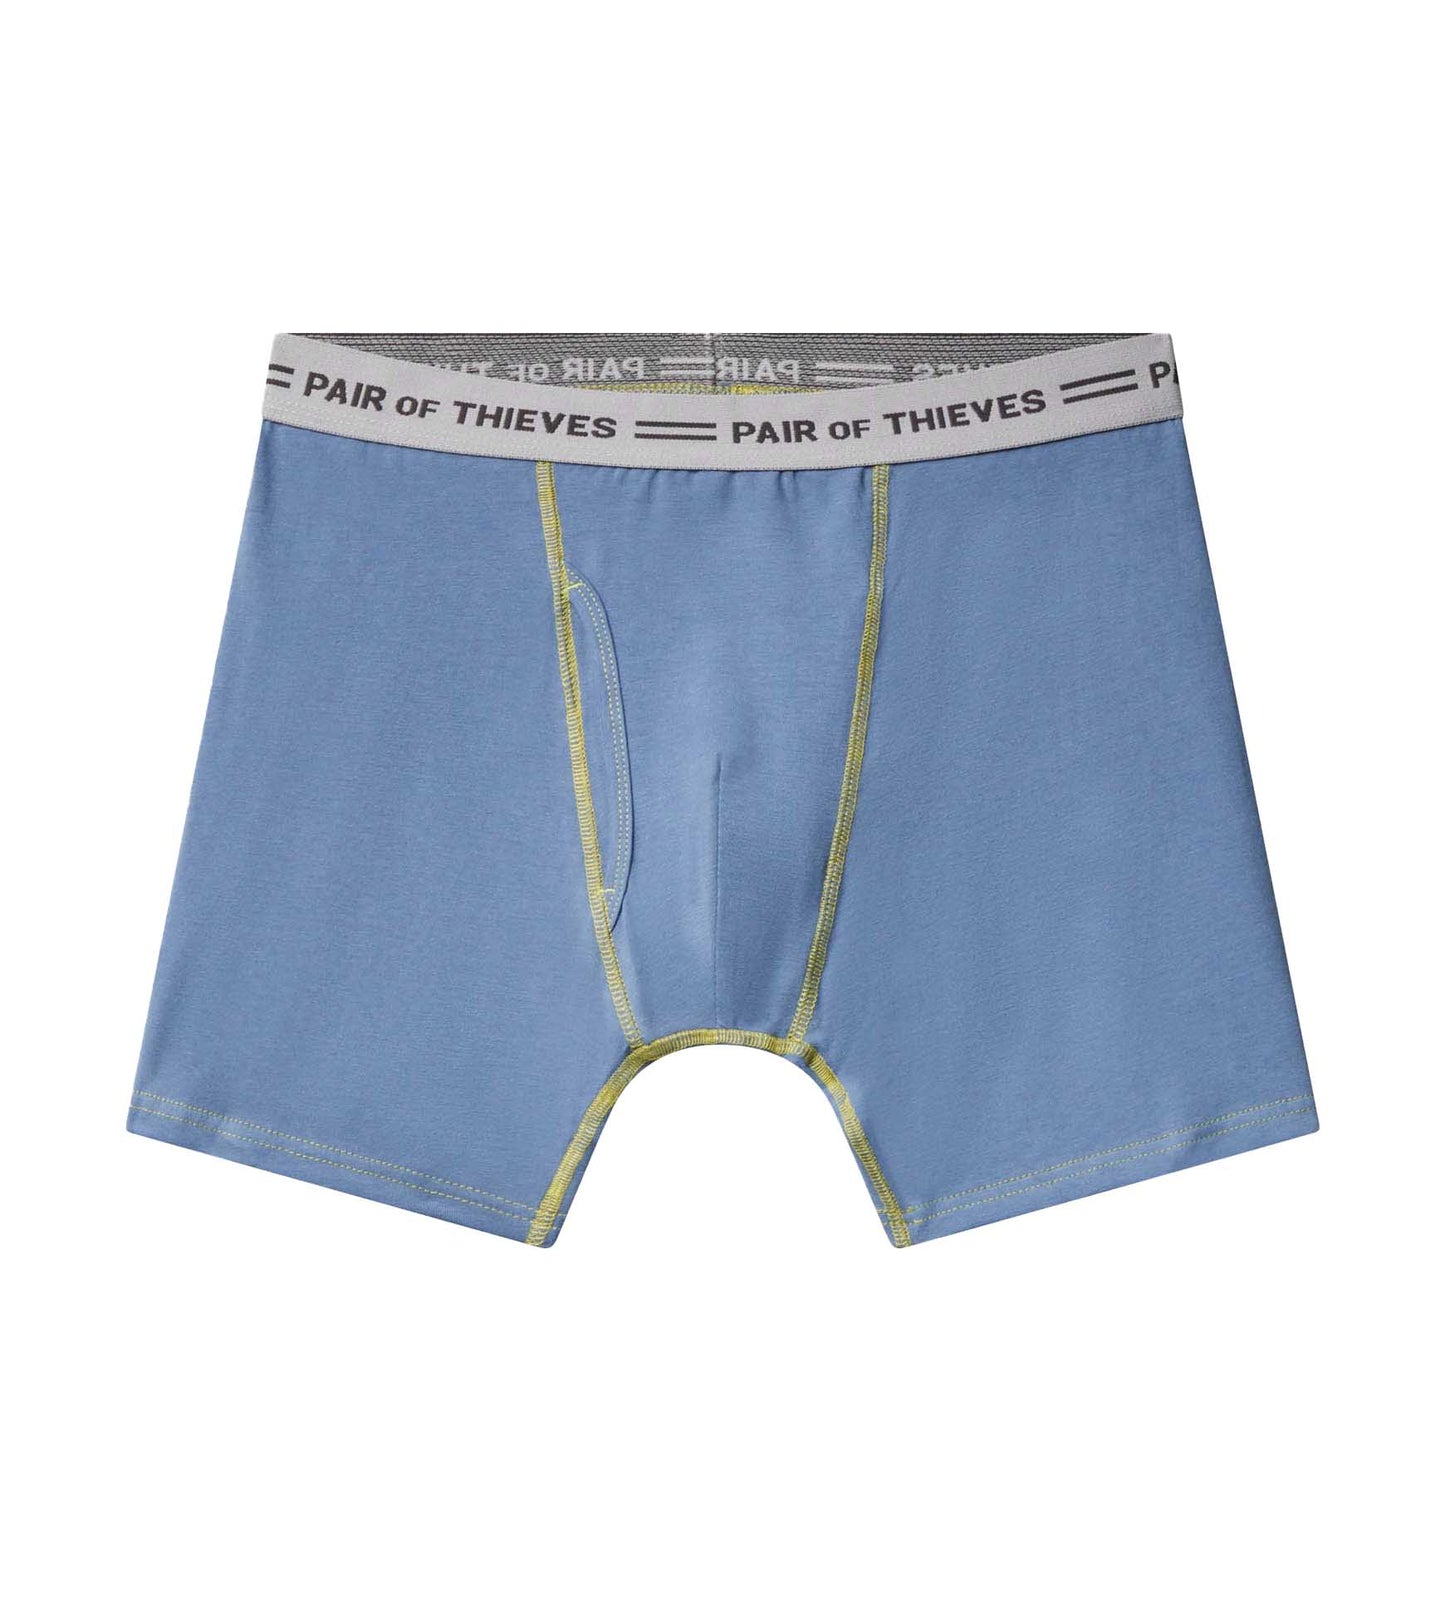 4-Way Stretch Every Day Kit Boxer Brief 4 Pack